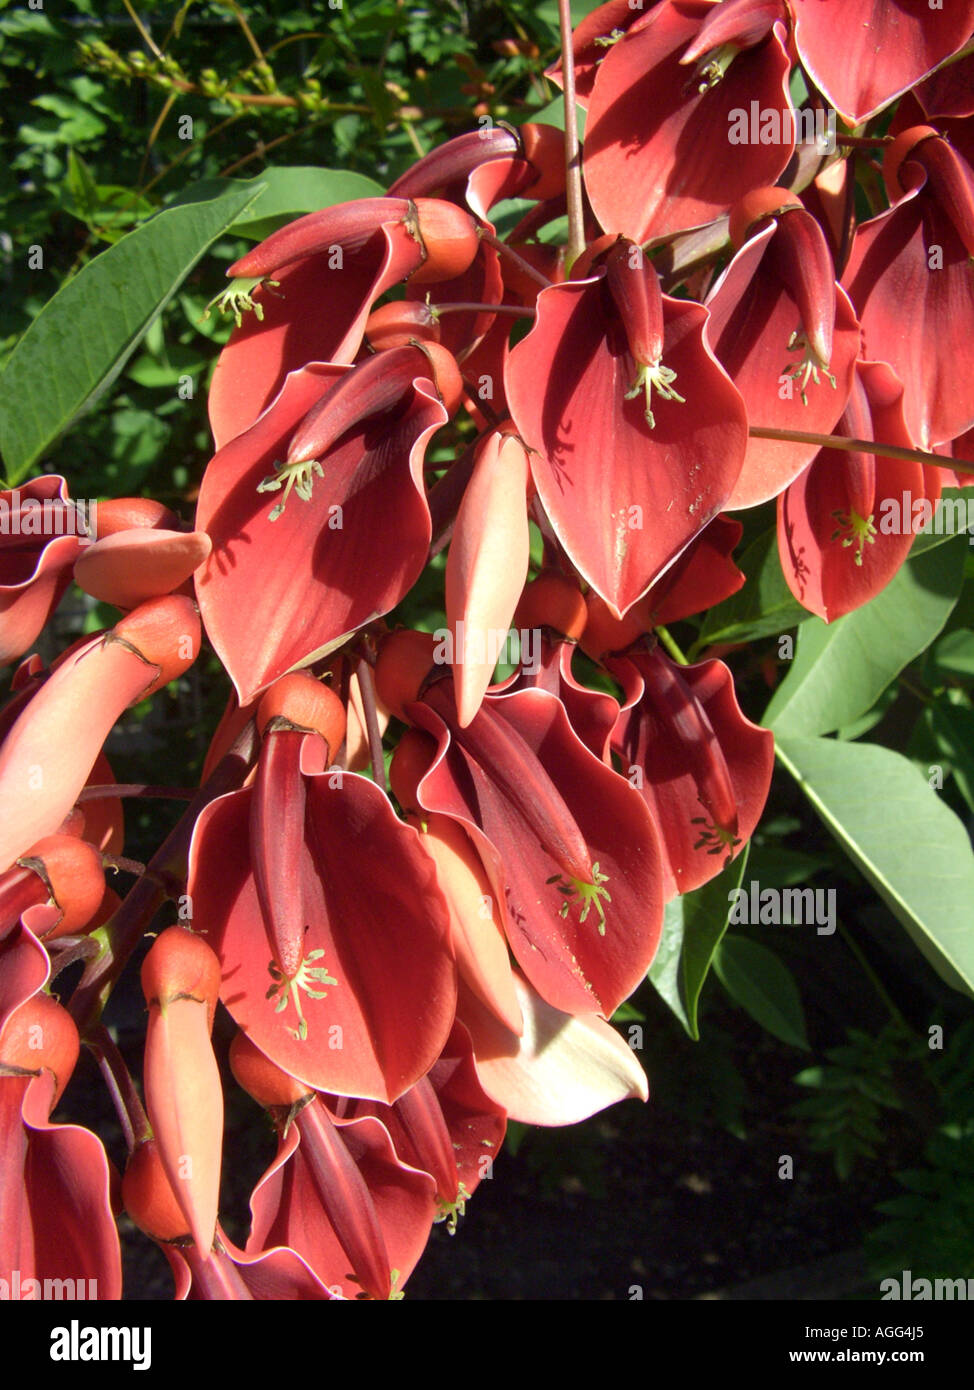 cockspur coral tree, crying baby (Erythrina crista-gallii), flowers Stock Photo